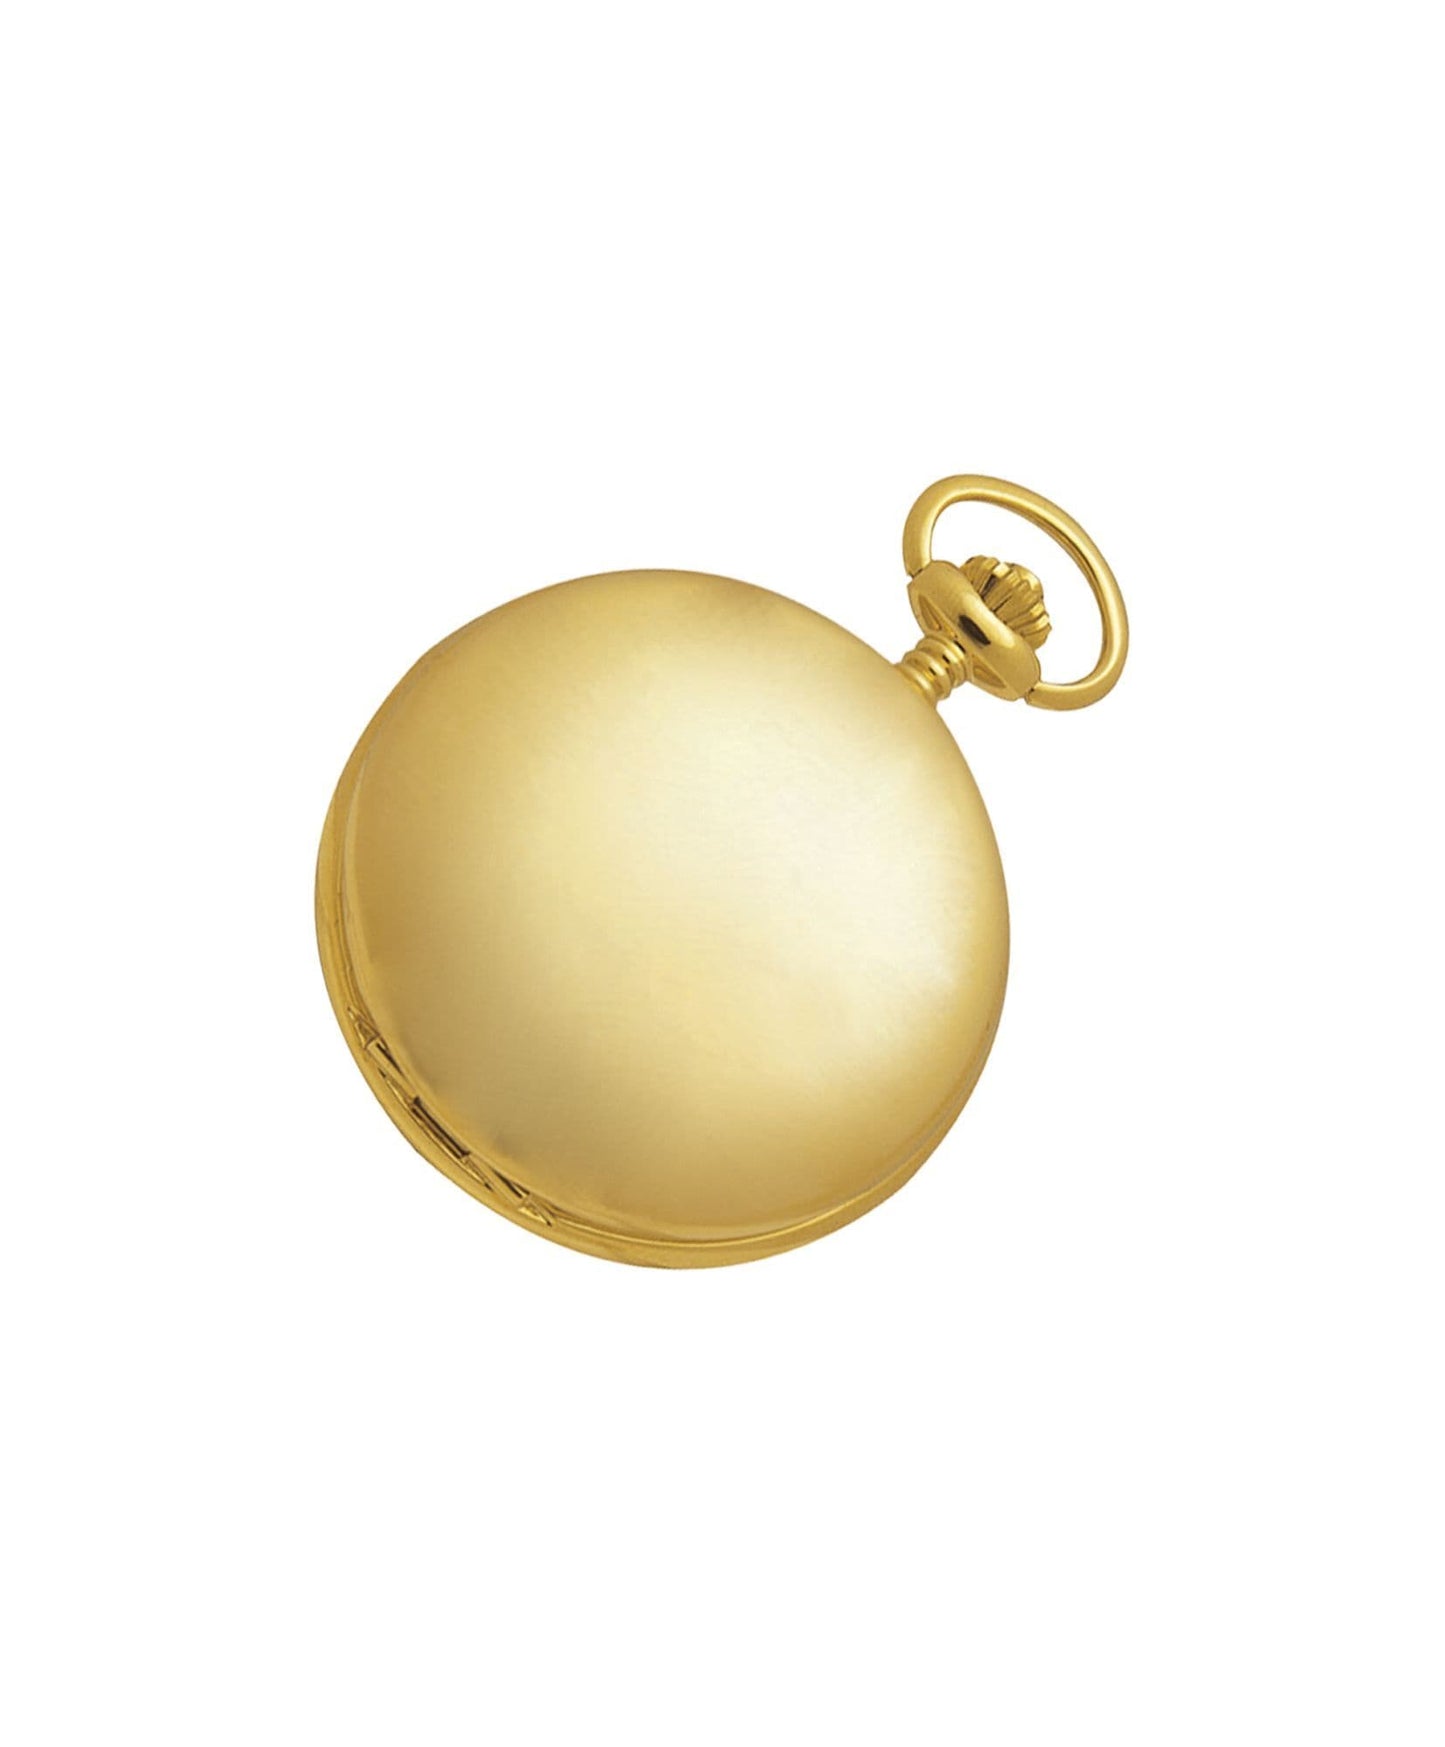 Mechanical Gold Plated Plain Pocket Watch With Chain